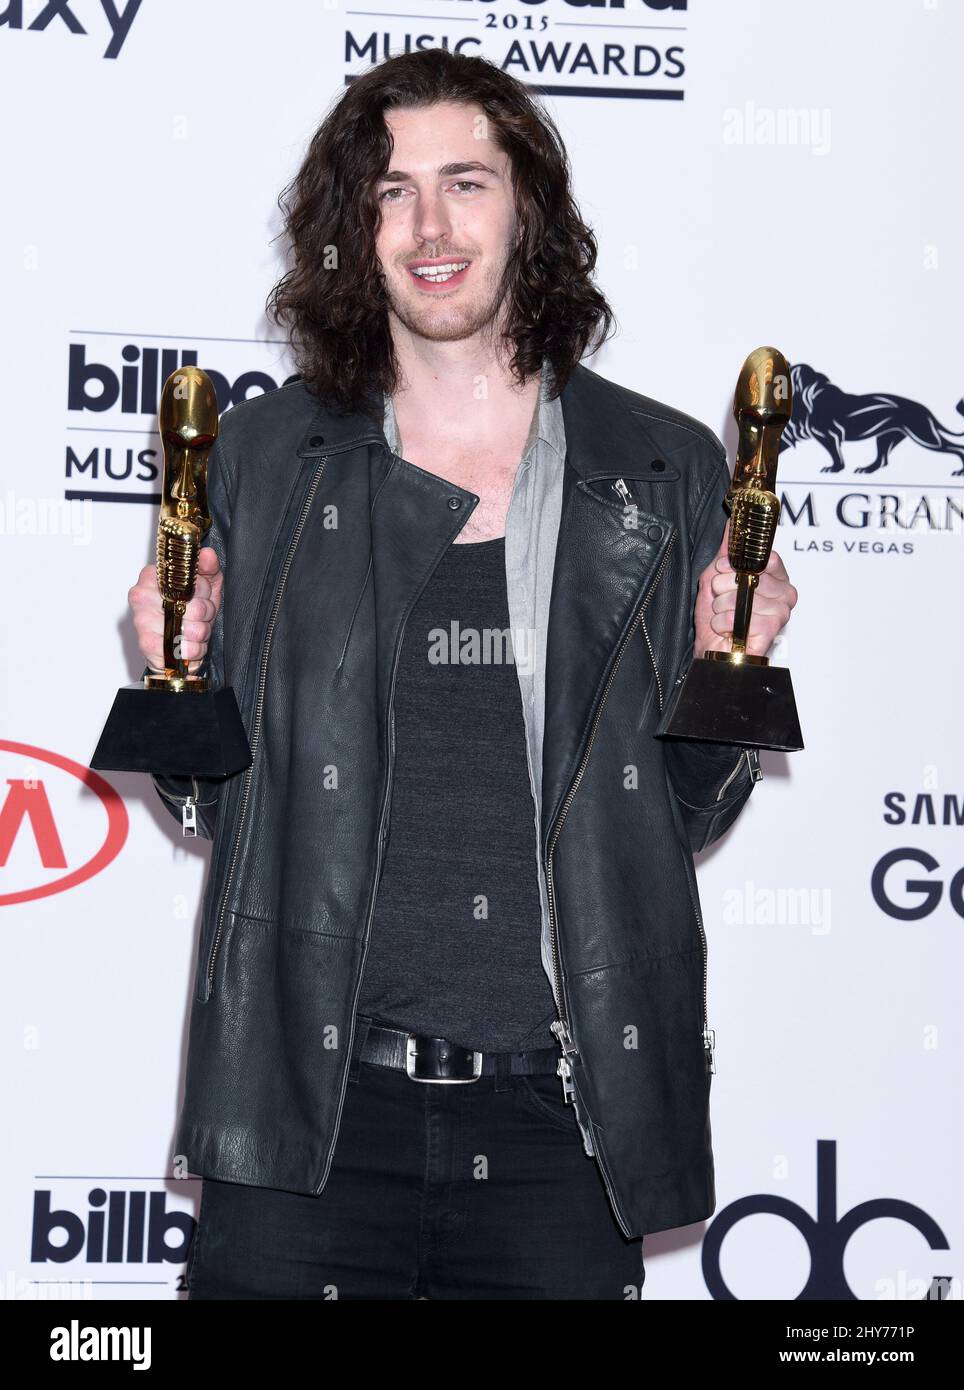 Andrew Hozier in the press room at the 2015 Billboard Music Awards held ...